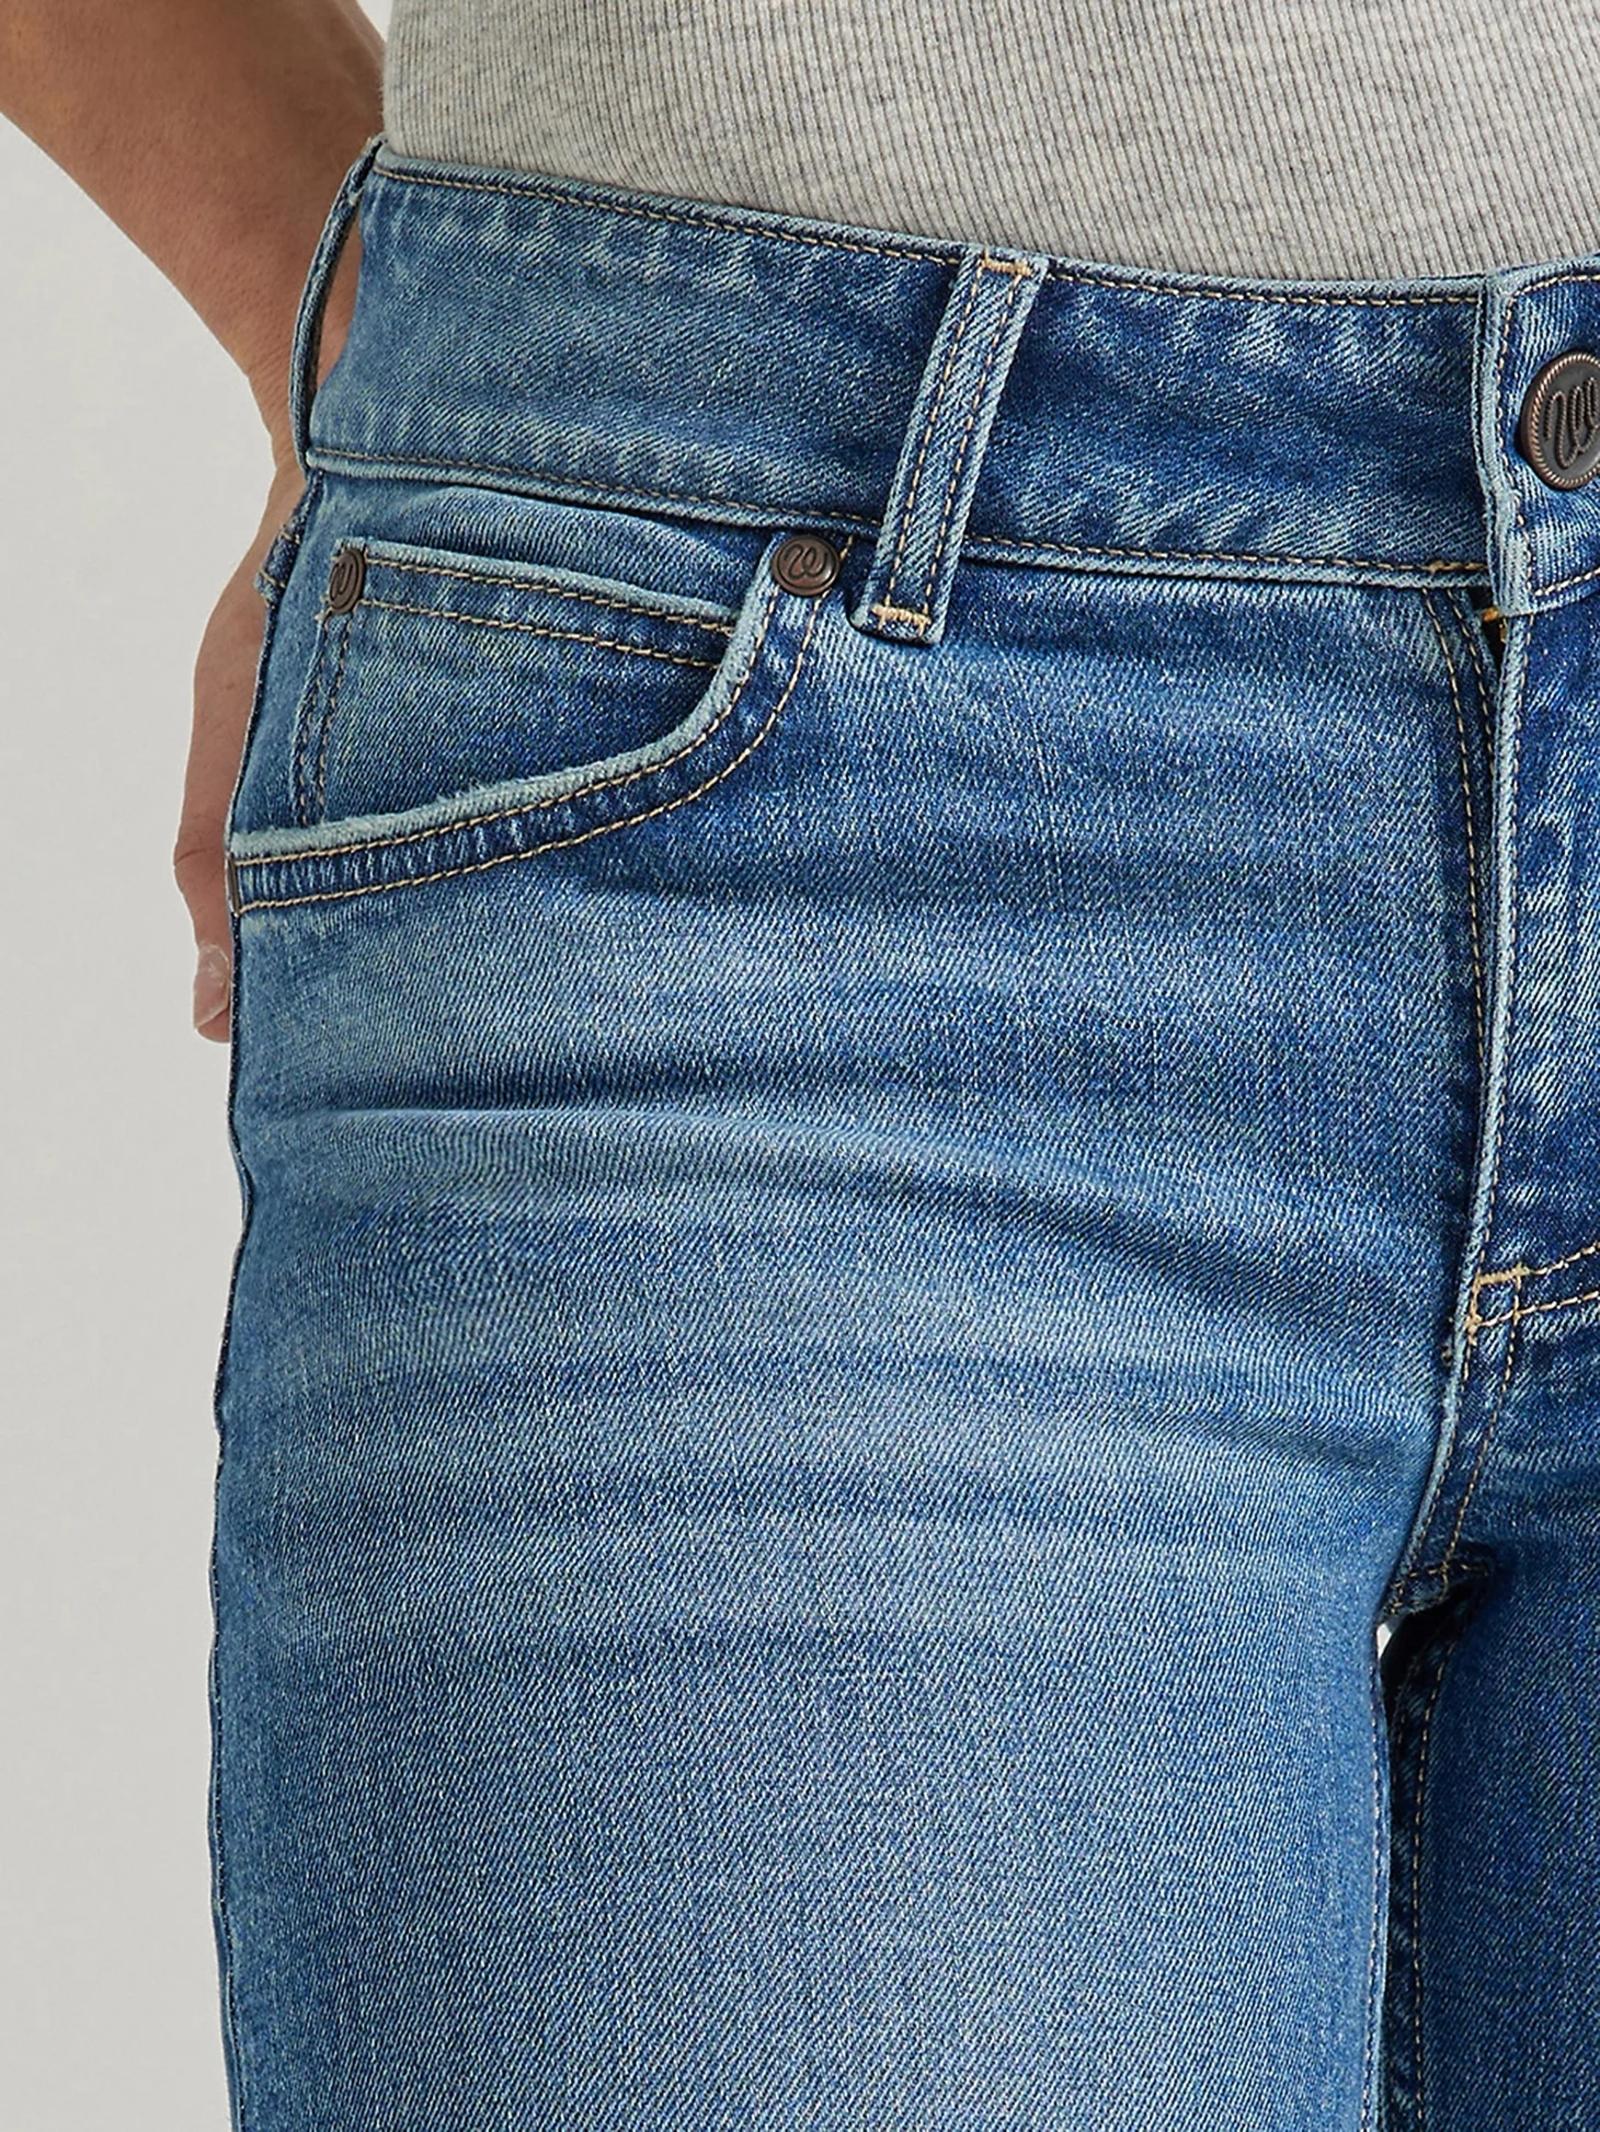 front pocket view